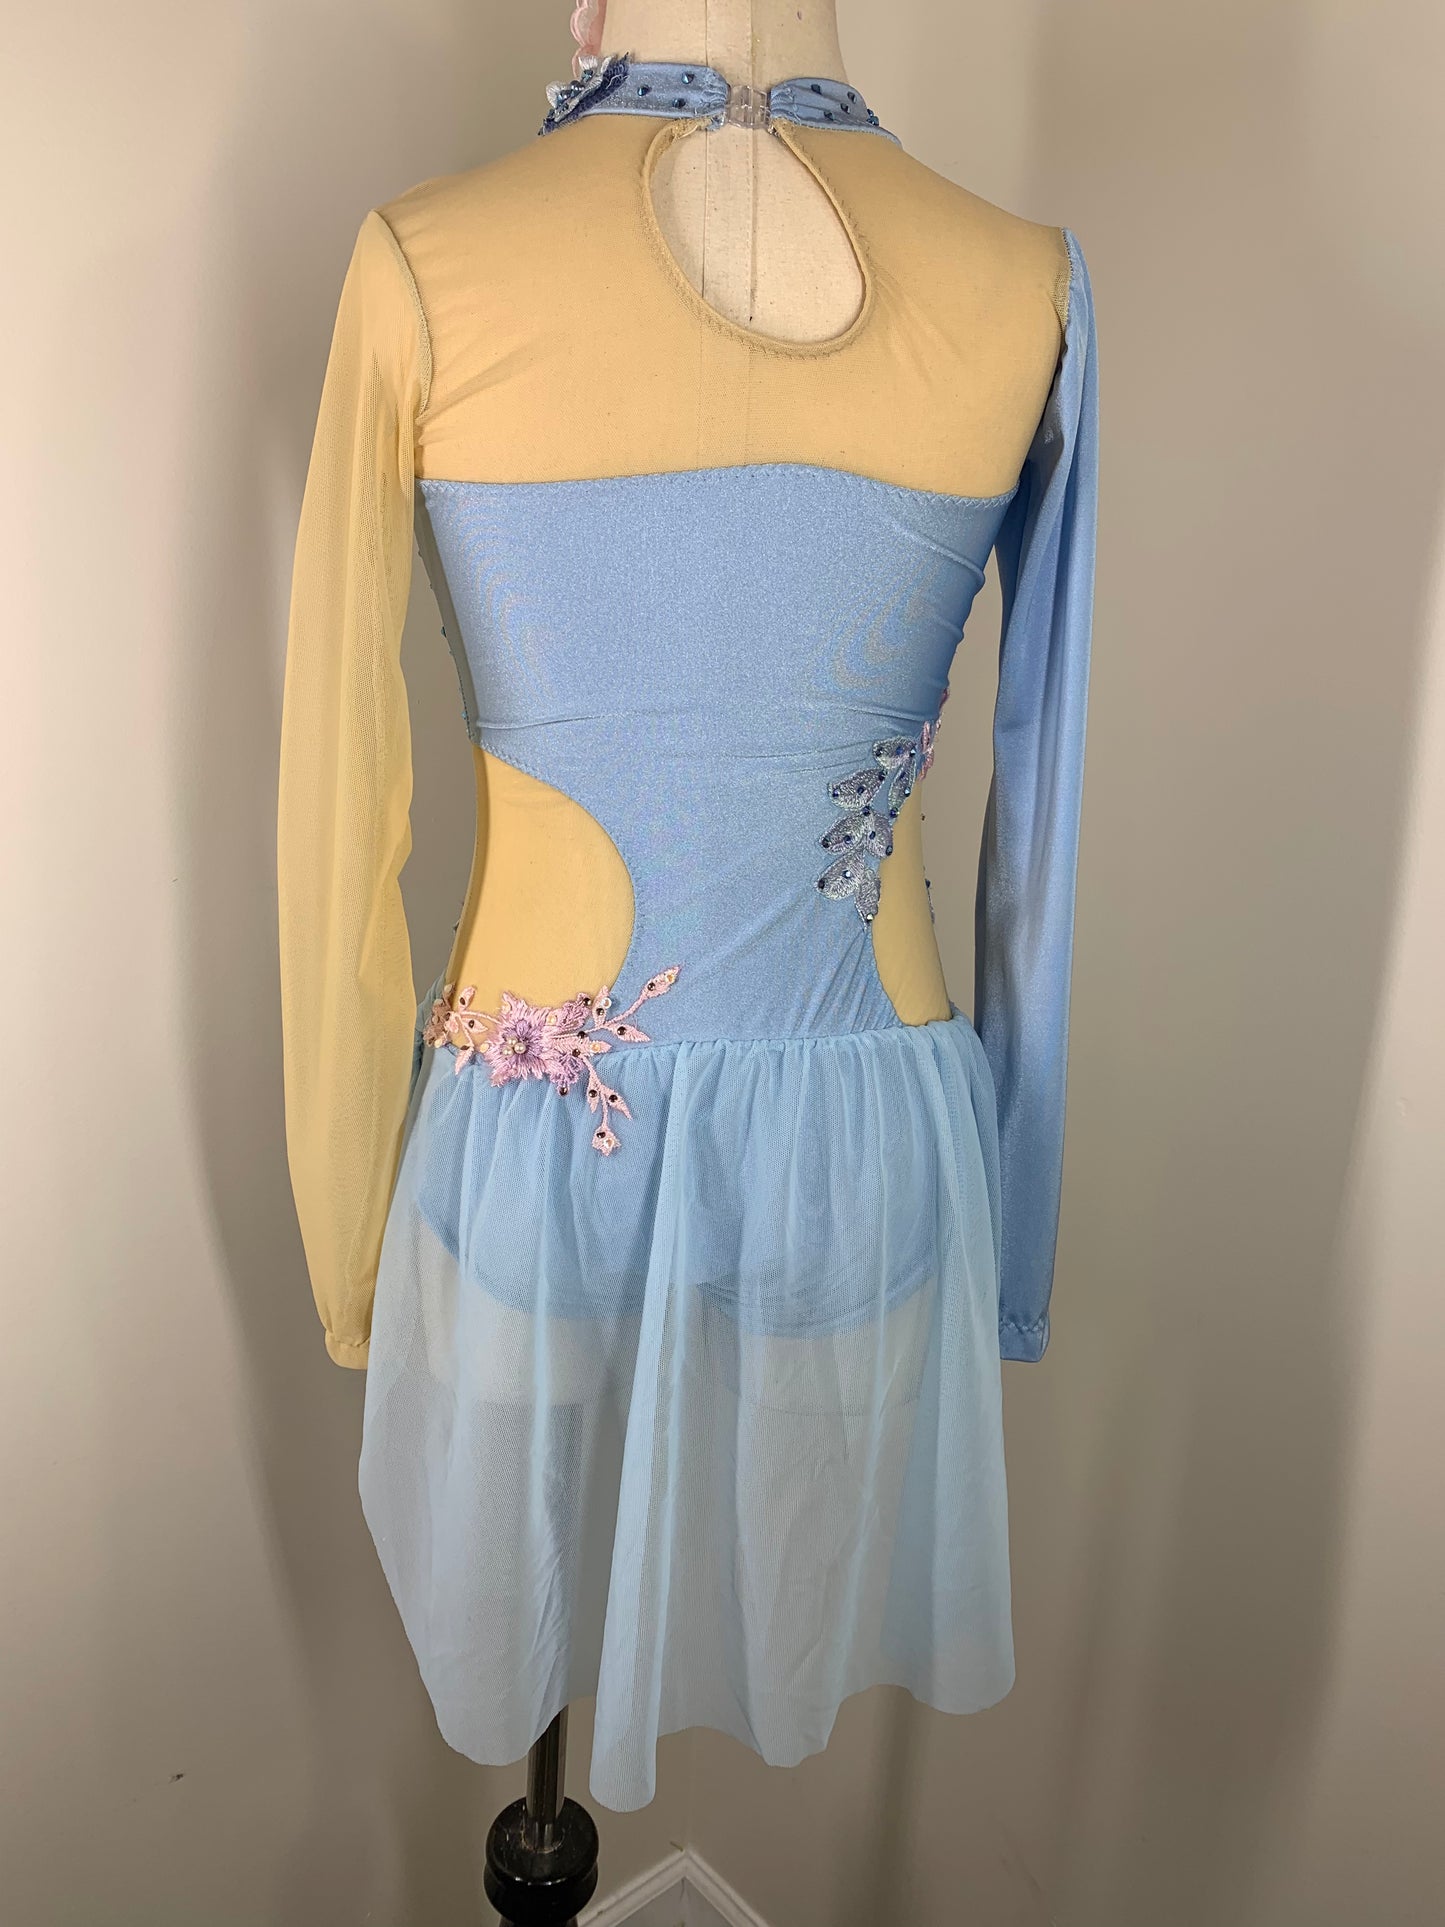 LC pink and blue dance costume